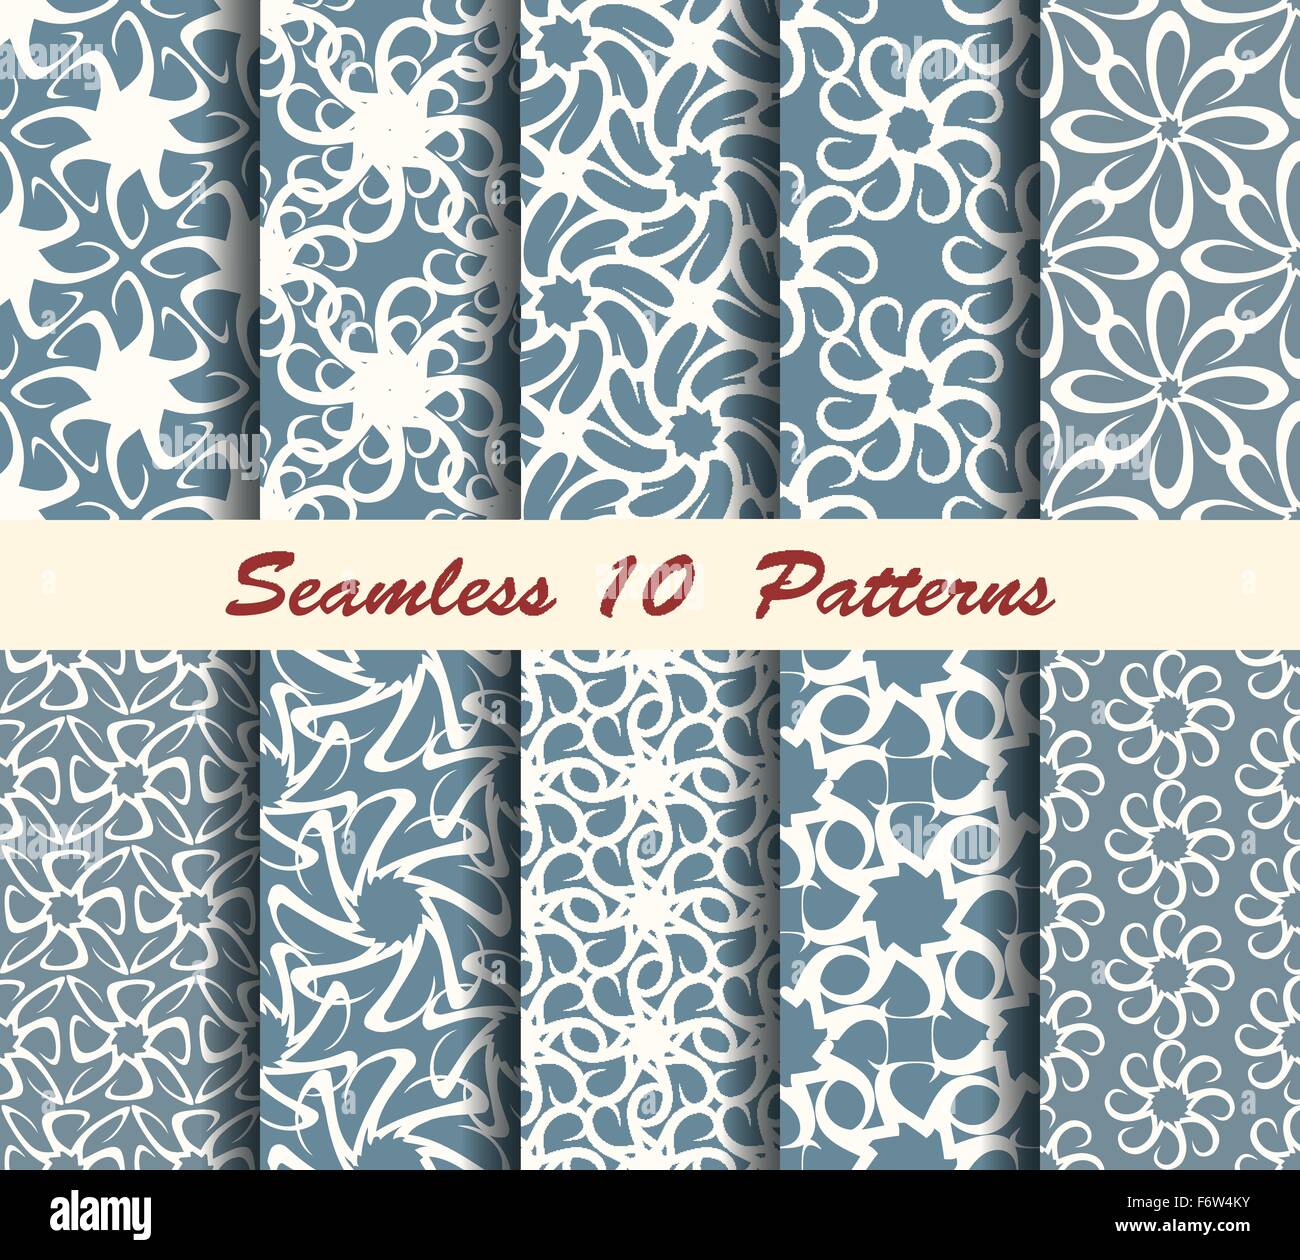 Set of abstract seamless patterns. Ten effortless floral textures for your design. Stock Vector